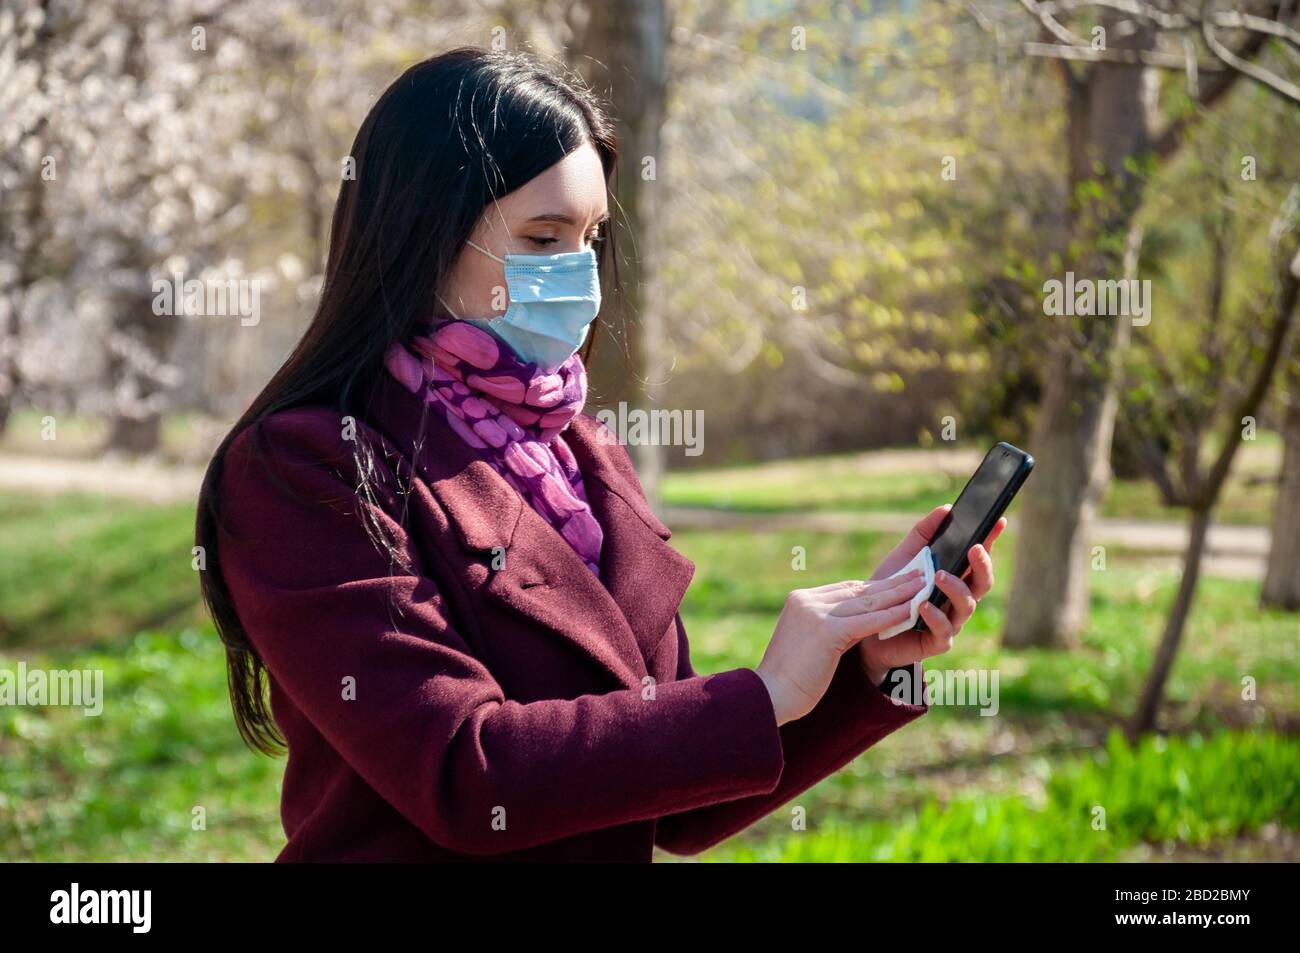 COVID-19. Young Woman in Protective Sterile Medical Face Mask Outdoors Disinfects Phone Antibacterial Napkin. Coronavirus Concept. Stock Photo